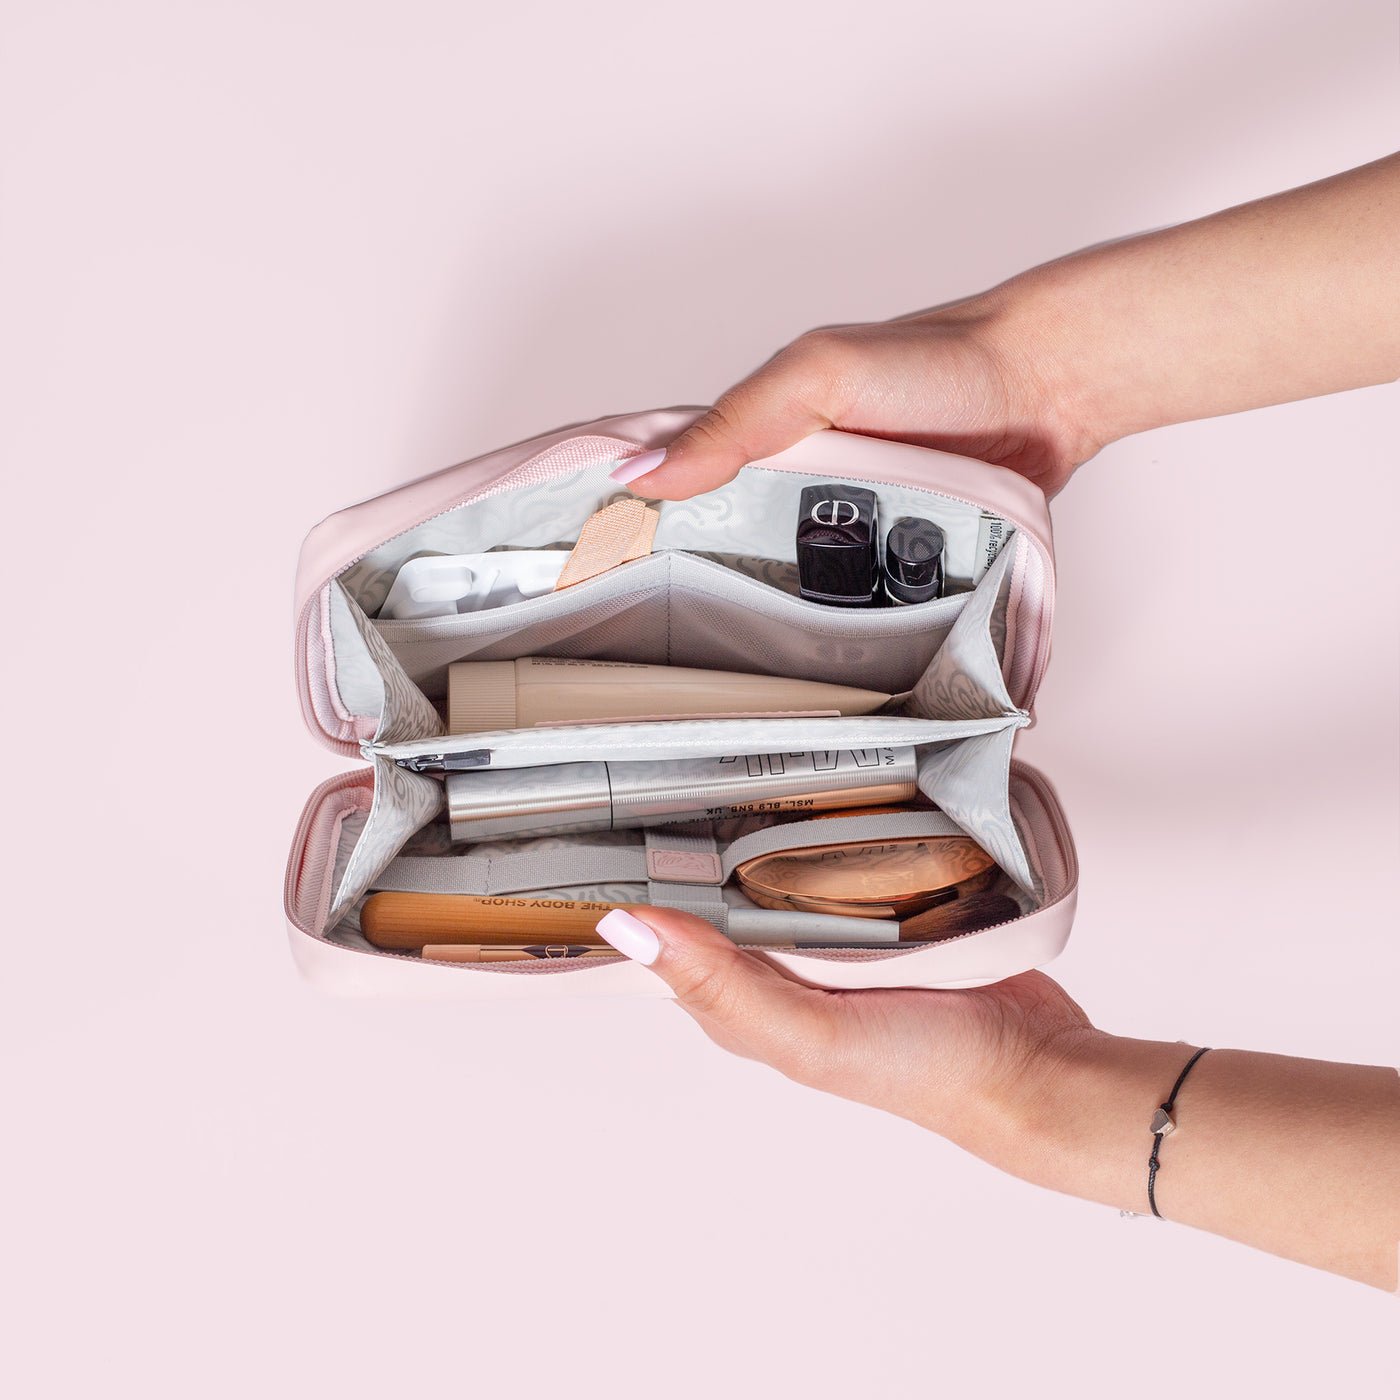 Female hands coming into shot from the right side holding open the Komodo Pink Eco Essentials Pouch to provide an internal view of the storage. On a pink background, packed inside the mesh pockets and elastic loops are painkillers, two fabric plasters, Christian Dior lipstick, Aesop lipbalm, Le Labo hand cream, Milk Mascara, Charlotte Tilbury face powder, Body Shop vegan makeup brush and a Charlotte Tilbury eyebrow pencil.